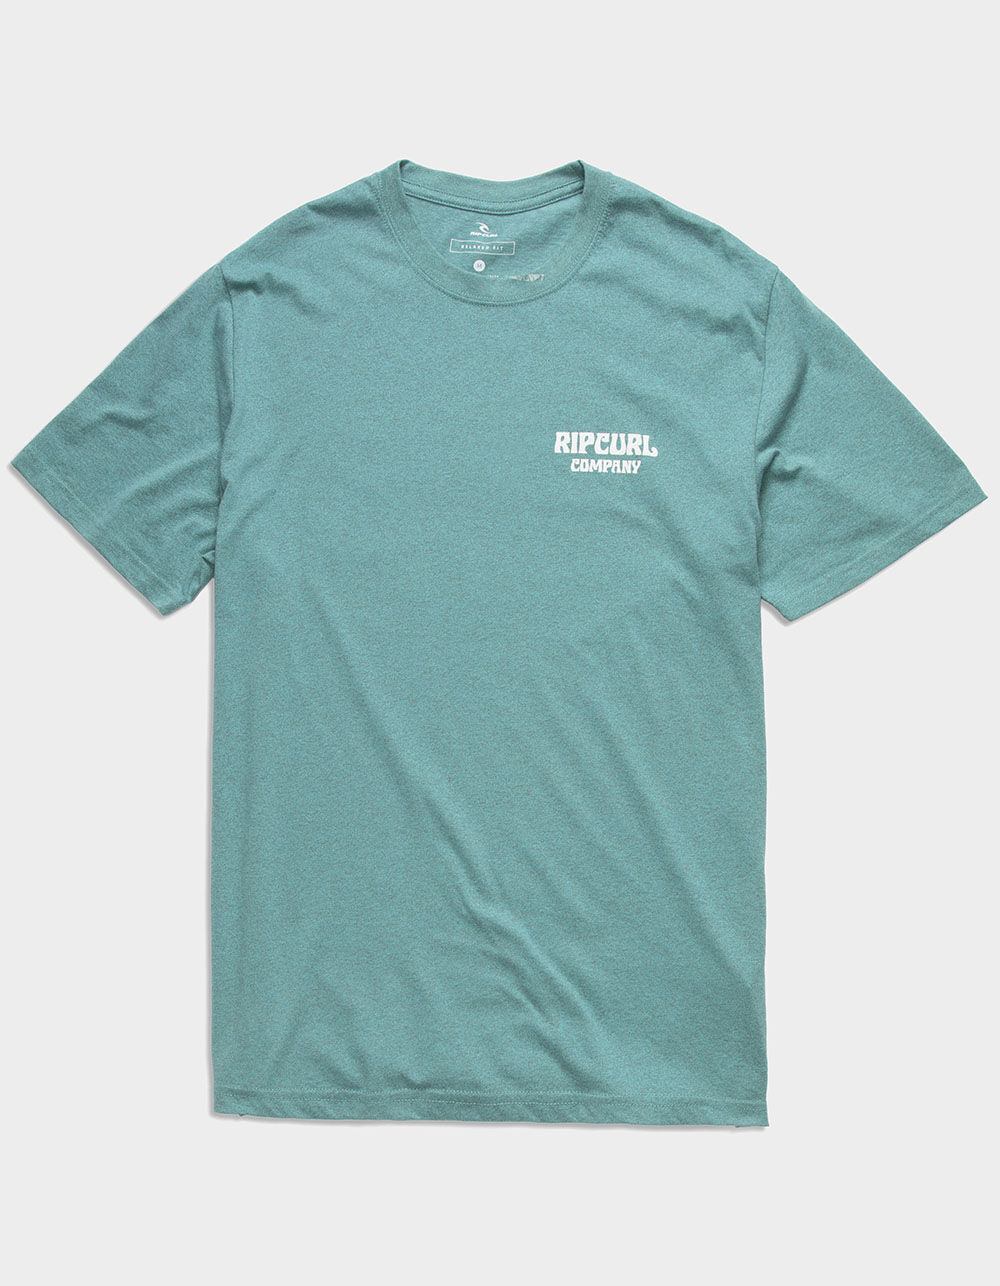 RIP CURL Fusion Wave Mens Tee - TEAL GREEN | Tillys